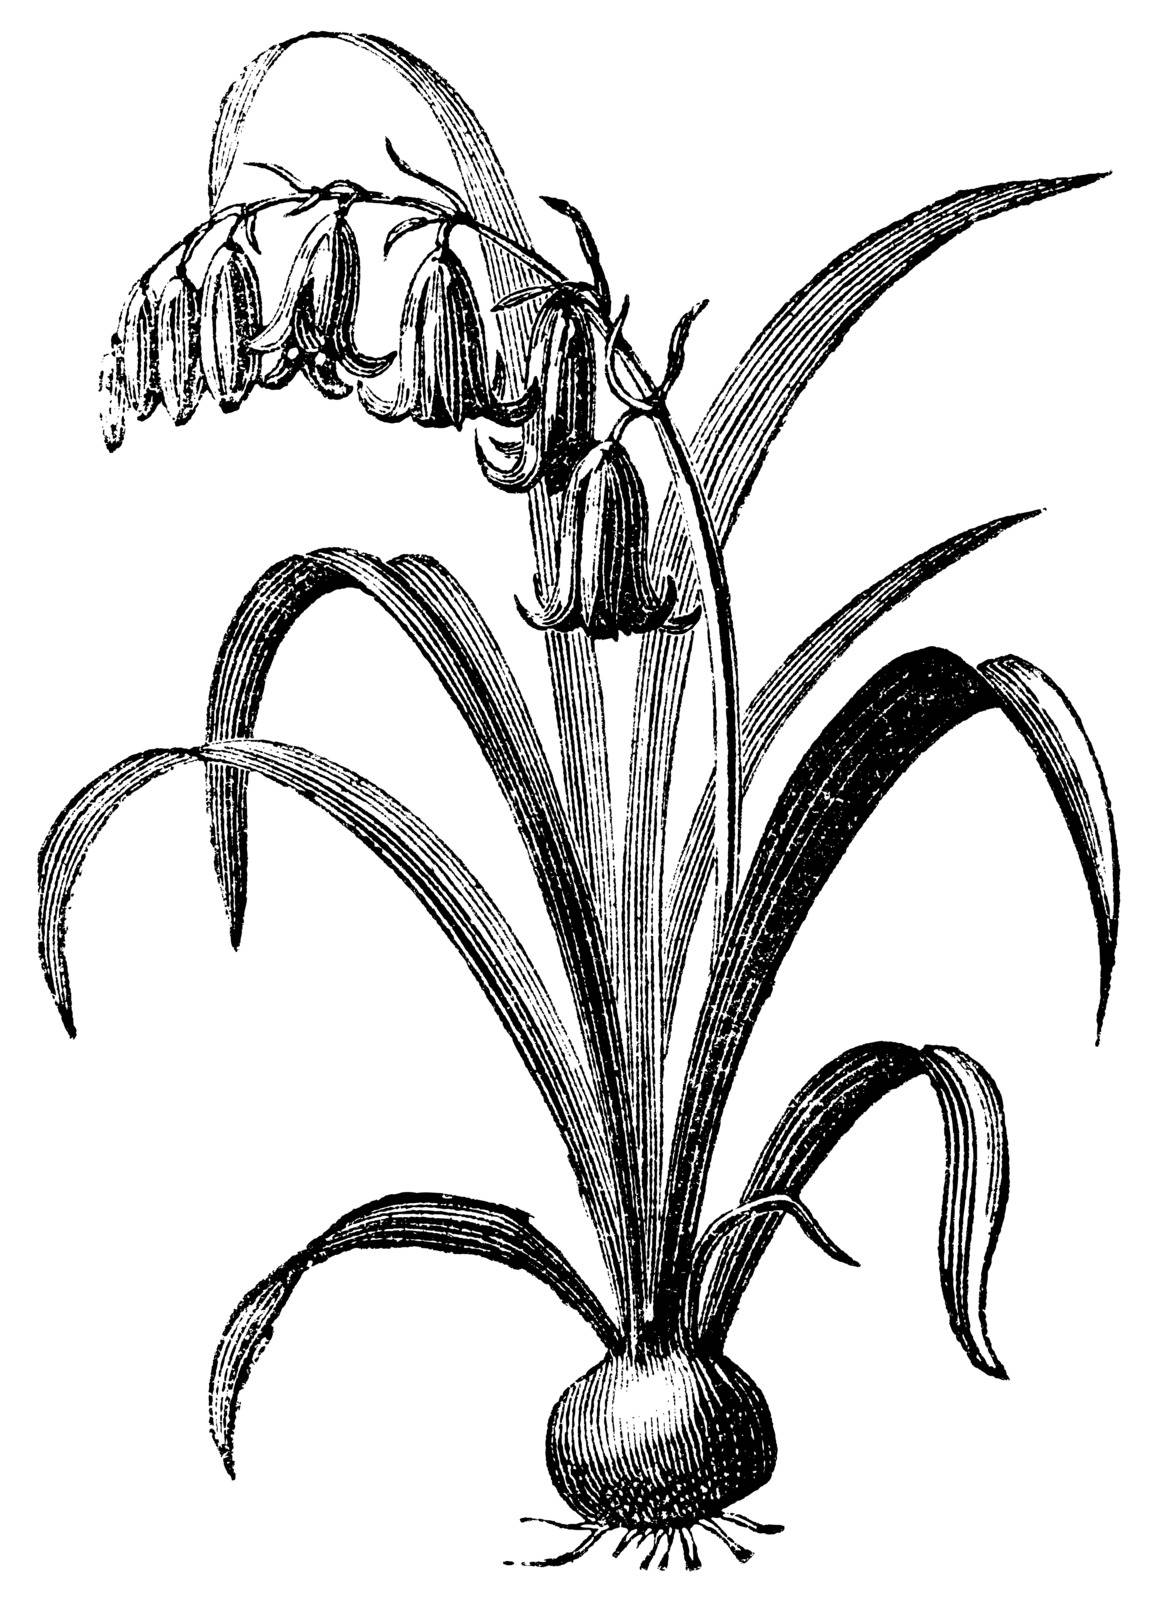 Common bluebell or Hyacinthoides non-scripta or Endymion non-scriptum or Scilla non-scripta or Agraphis nutans, vintage engraving. Old engraved illustration of Common bluebell isolated on a white background. 